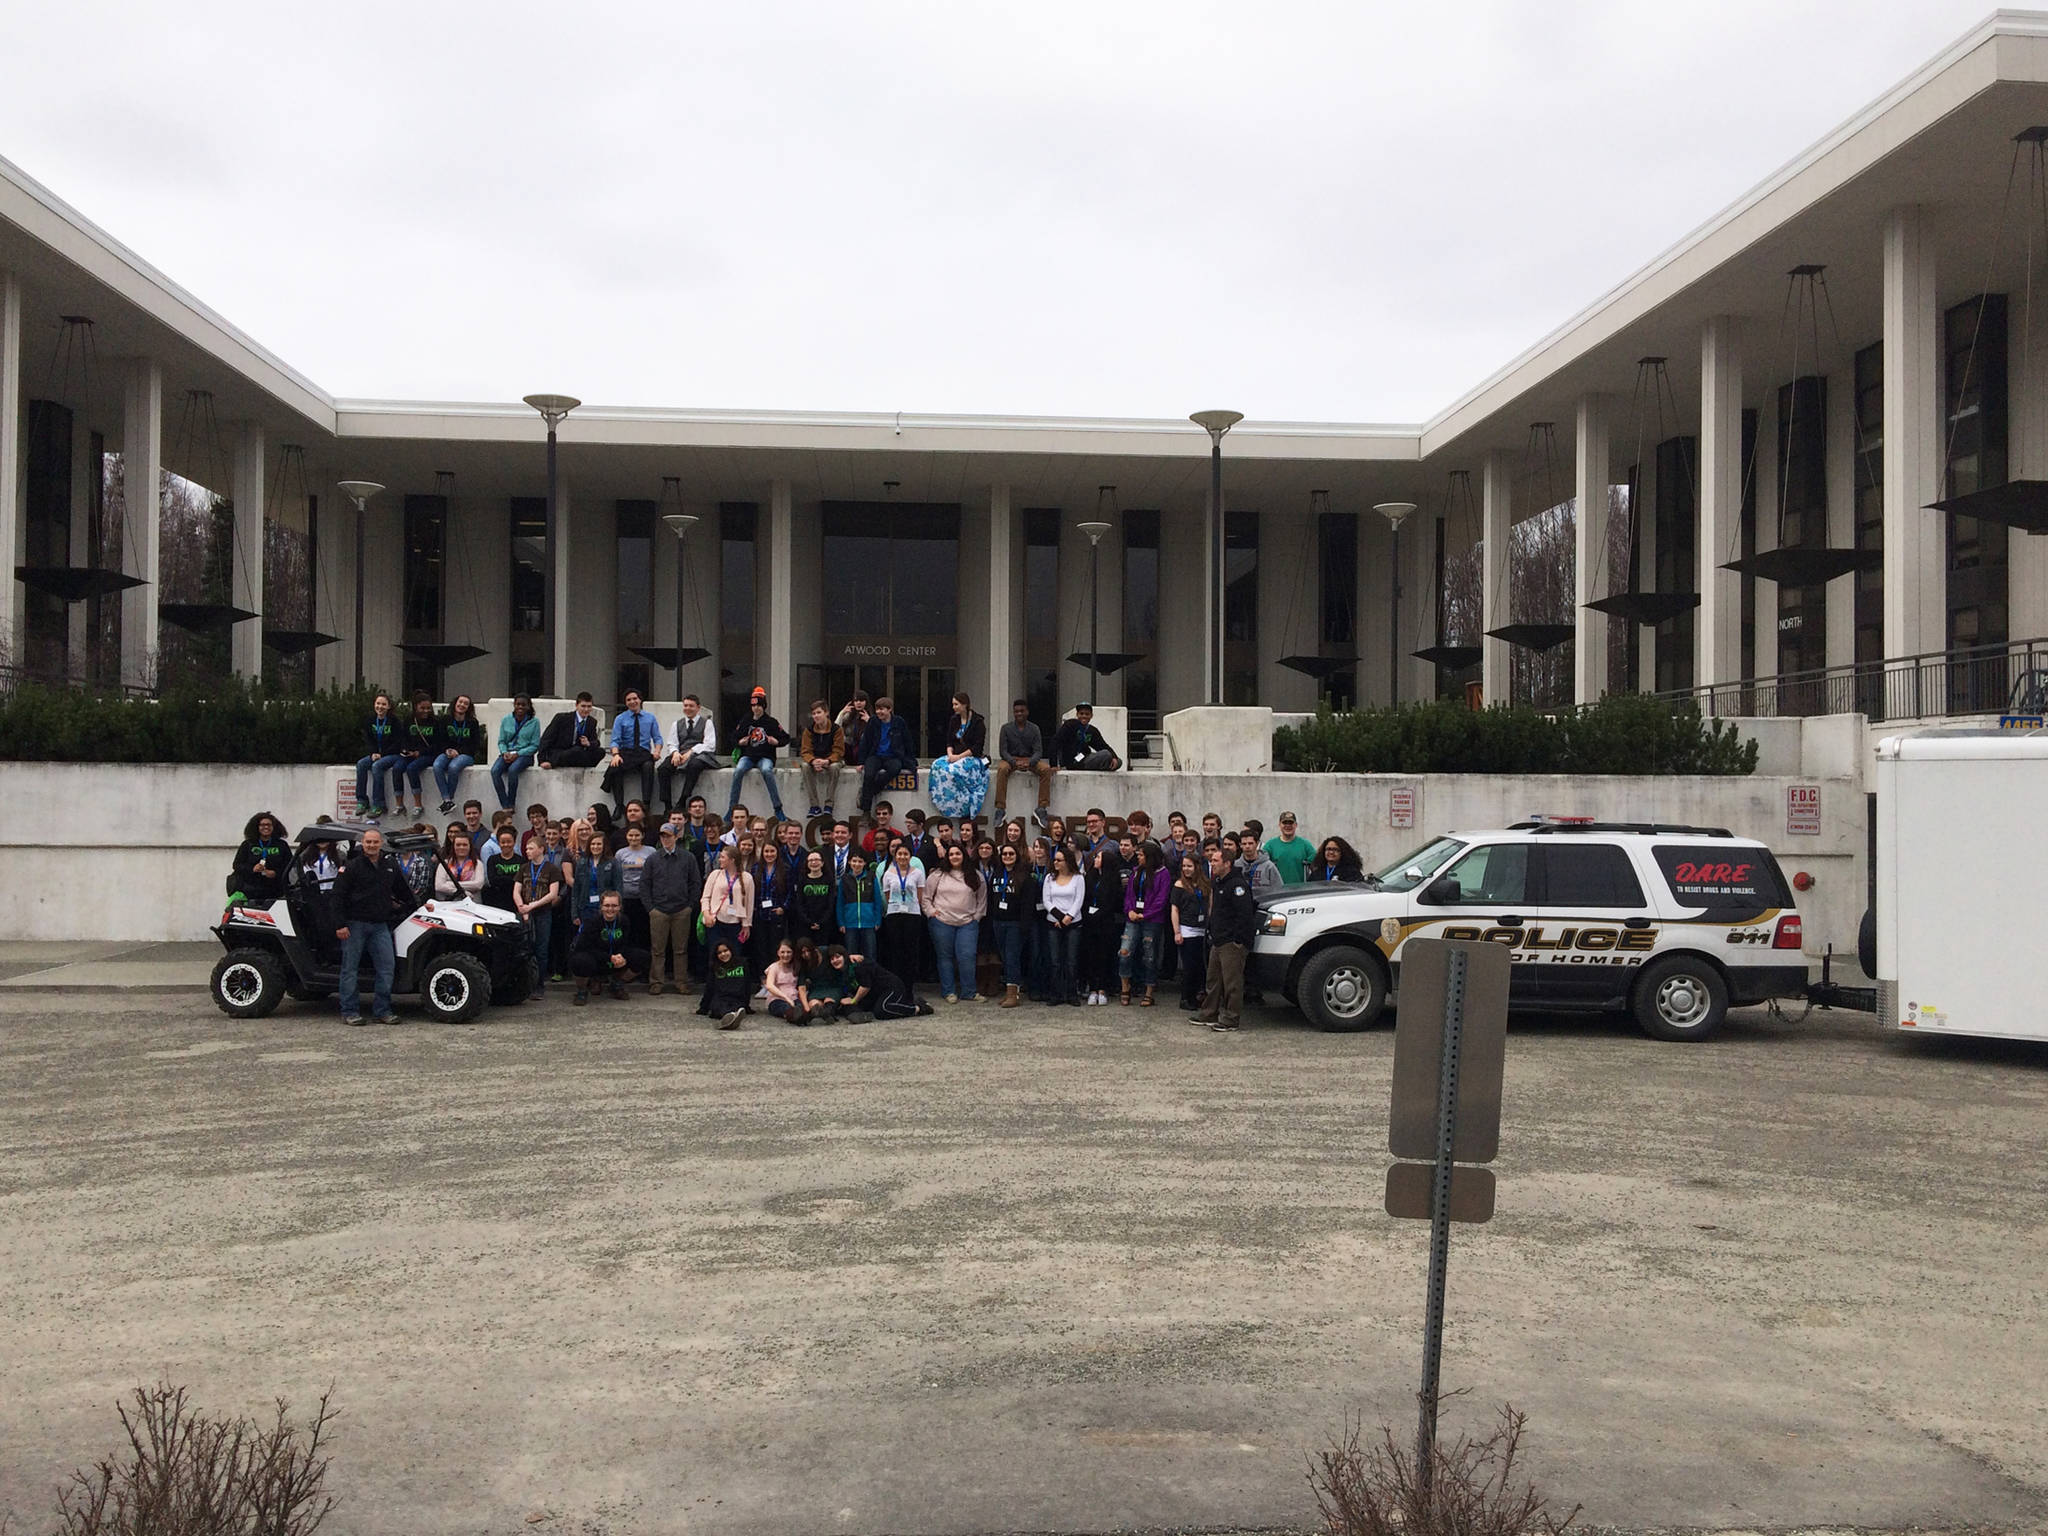 Sgt. Ryan Browning and Officer Jim Knott pose with teenagers at the State Youth Court Conference in summer 2015 in Anchorage, Alaska. The Homer Police Department has been invited to travel around the state to share its Project Drive, and anti-drunk driving educational clinic in place since 2011. (Photo courtesy Ryan Browning)